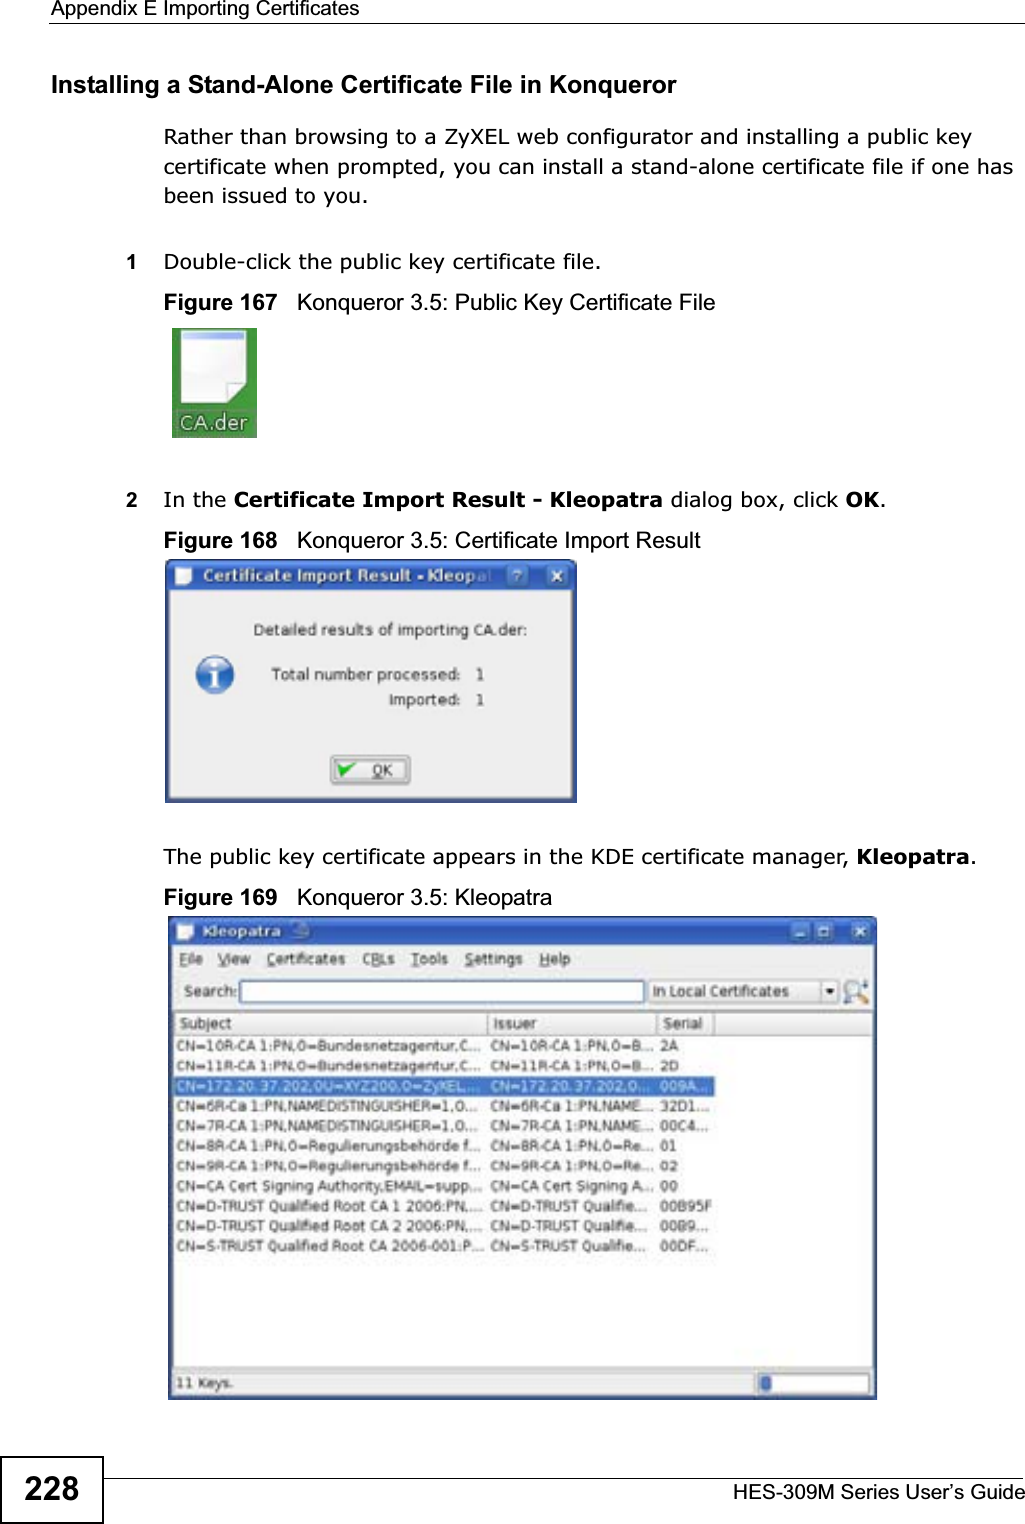 Appendix E Importing CertificatesHES-309M Series User’s Guide228Installing a Stand-Alone Certificate File in KonquerorRather than browsing to a ZyXEL web configurator and installing a public key certificate when prompted, you can install a stand-alone certificate file if one has been issued to you.1Double-click the public key certificate file.Figure 167   Konqueror 3.5: Public Key Certificate File2In the Certificate Import Result - Kleopatra dialog box, click OK.Figure 168   Konqueror 3.5: Certificate Import ResultThe public key certificate appears in the KDE certificate manager, Kleopatra.Figure 169   Konqueror 3.5: Kleopatra